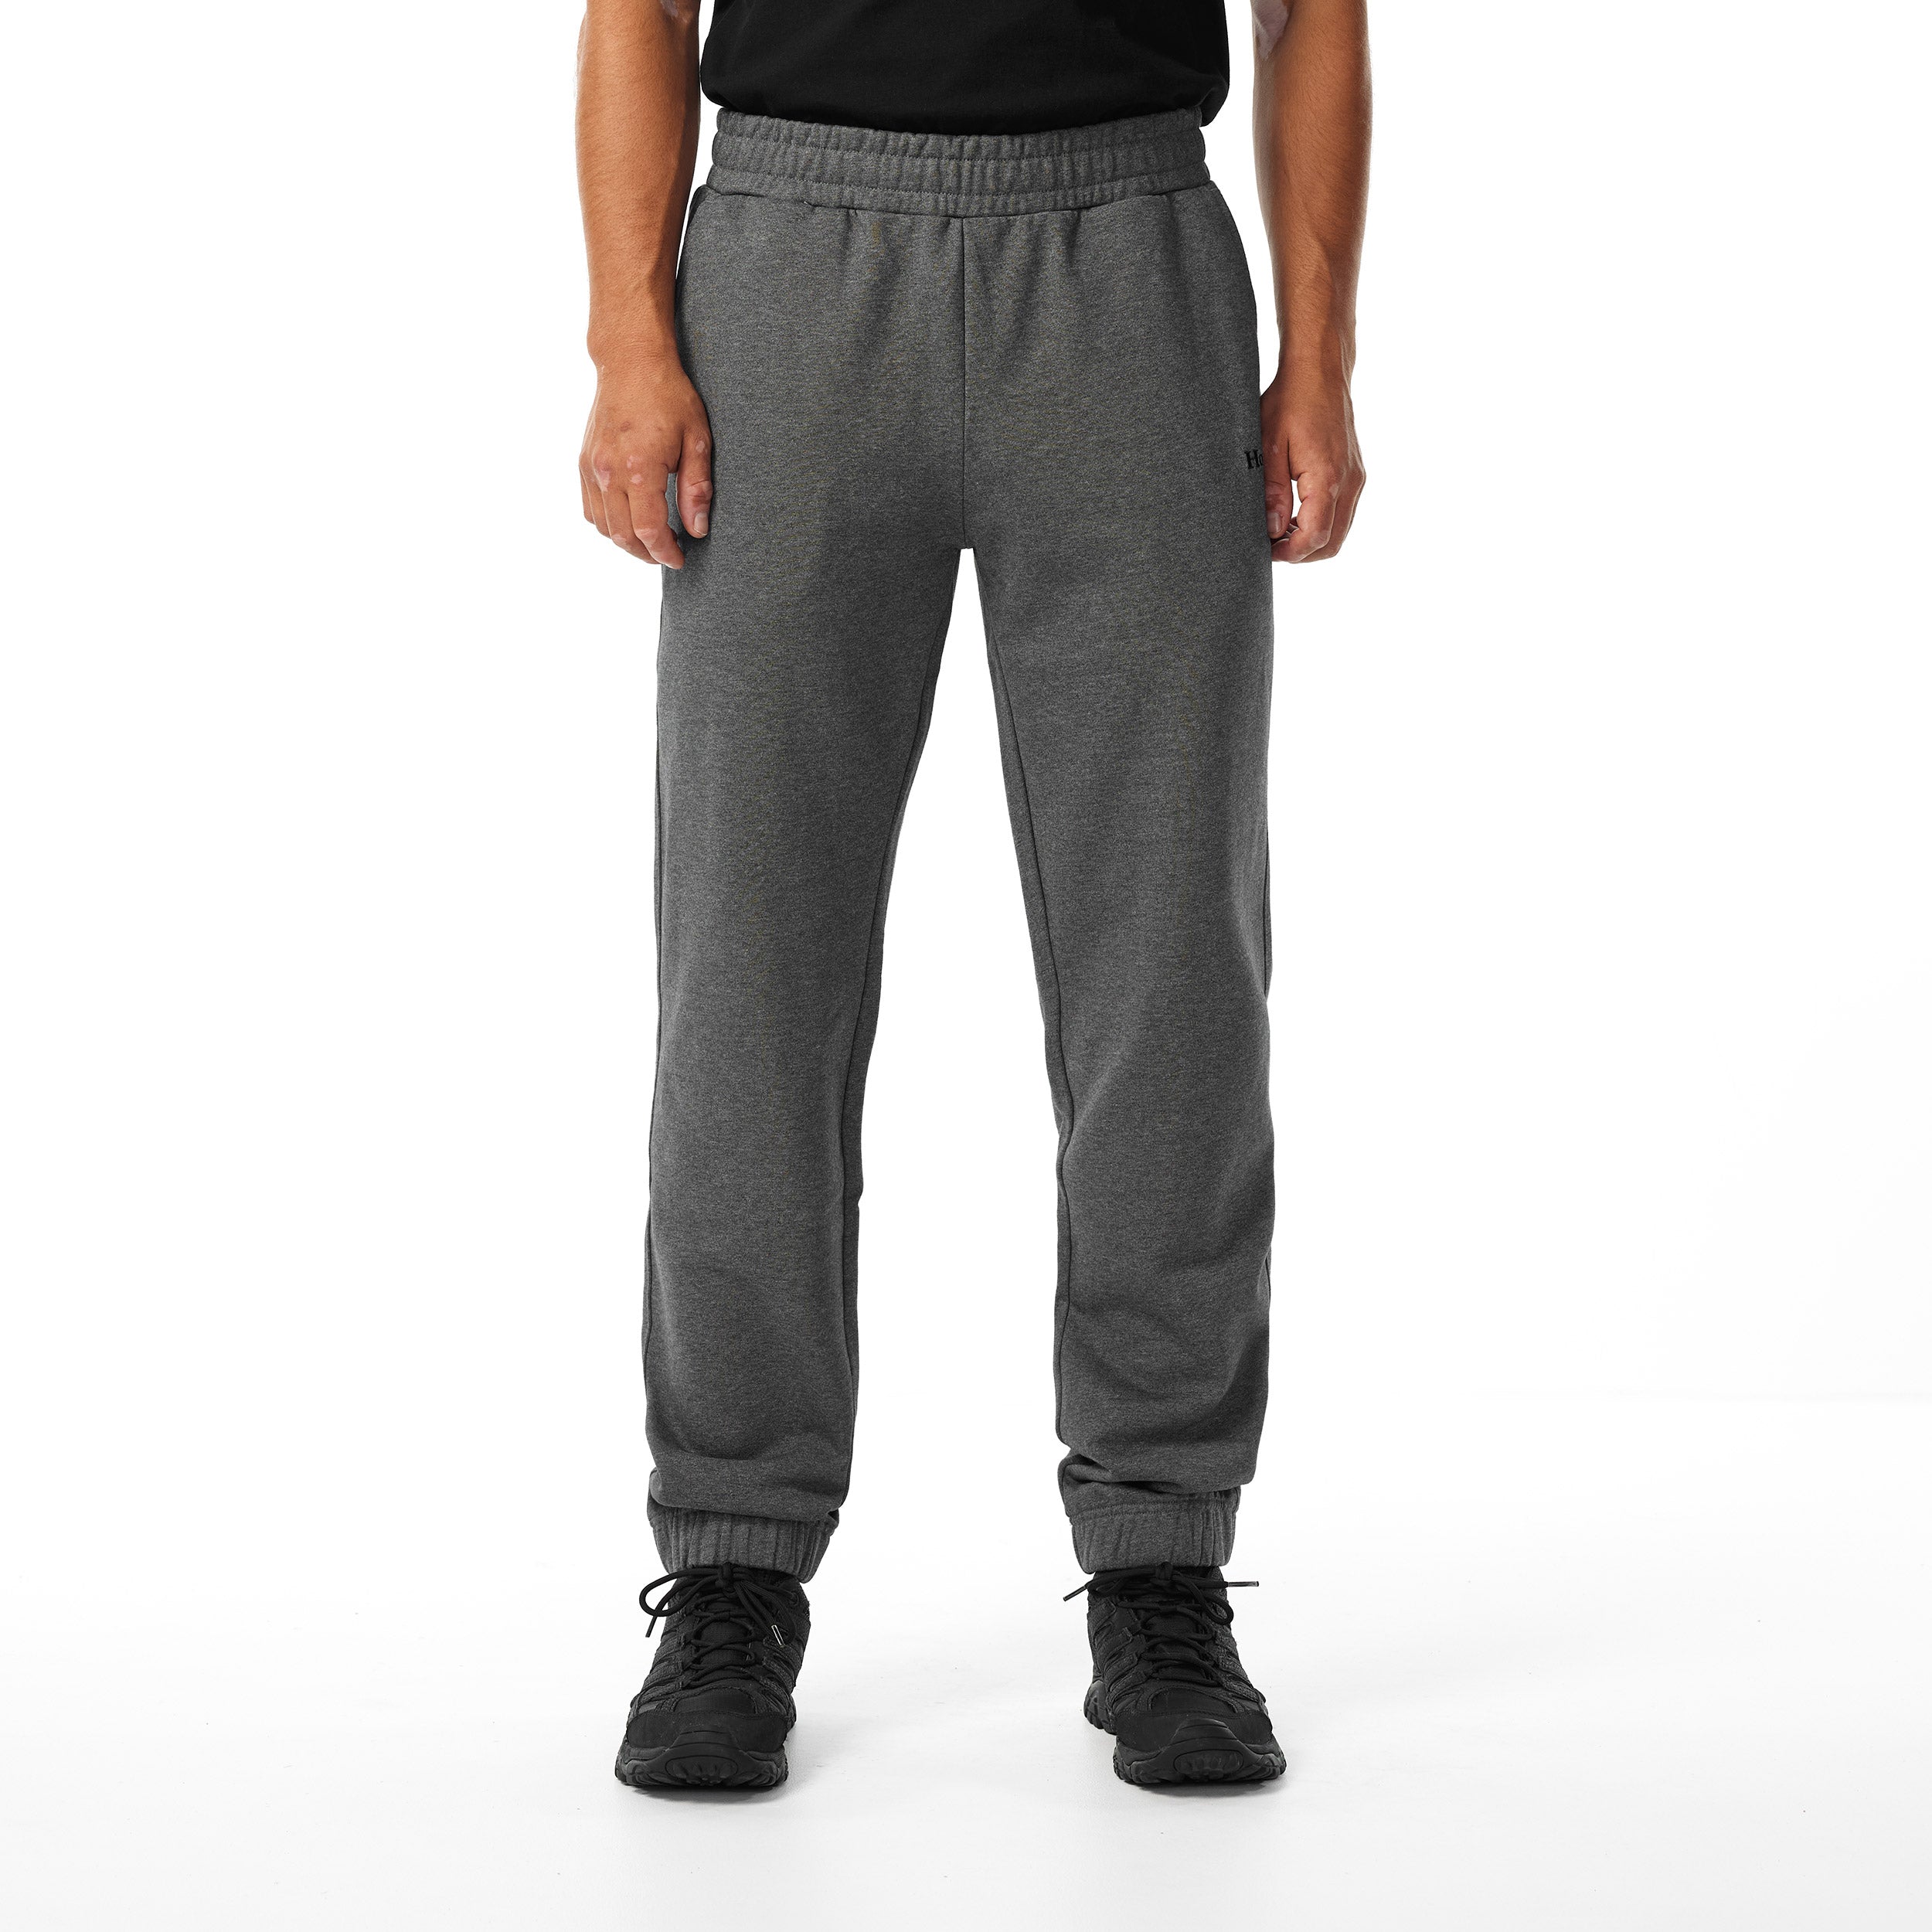 Nike Women's warm cotton sweatpants: for sale at 49.99€ on